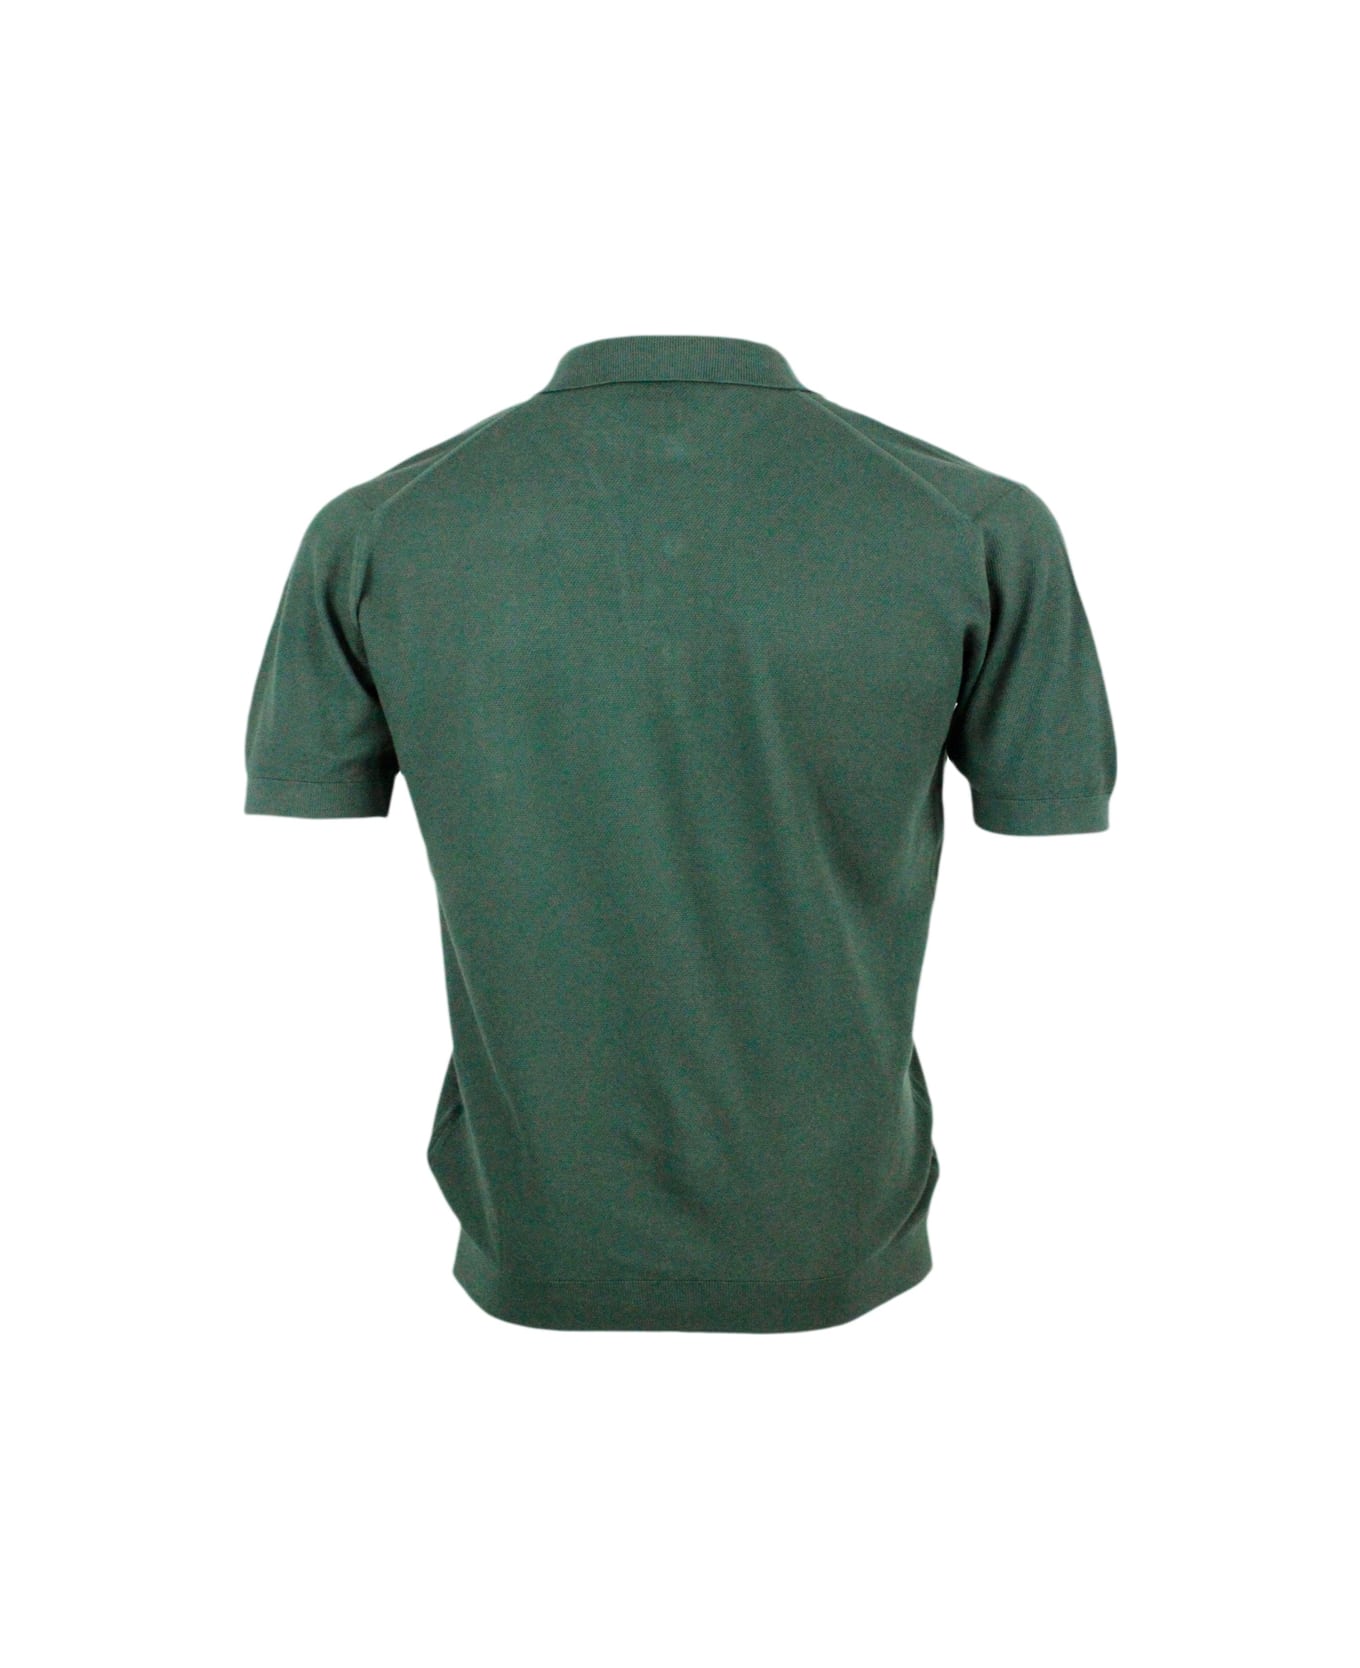 John Smedley Short-sleeved Sustainable Polo Shirt In Extrafine Piqué Cotton Thread With Three Buttons - Green